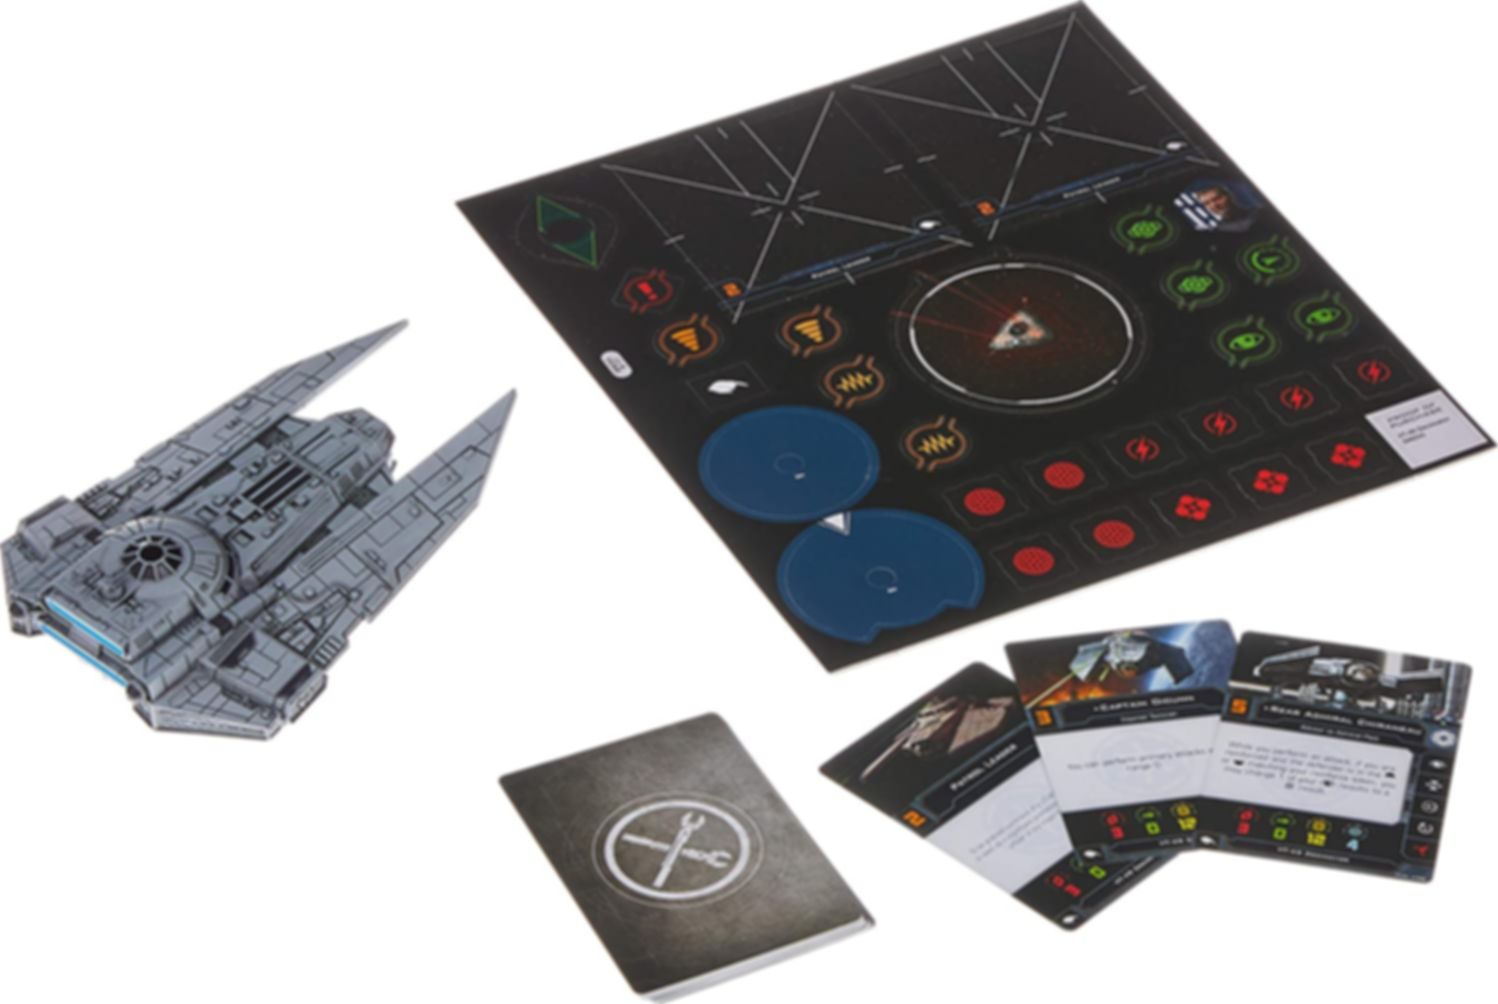 Star Wars: X-Wing (Second Edition) - VT-49 Decimator Expansion Pack components